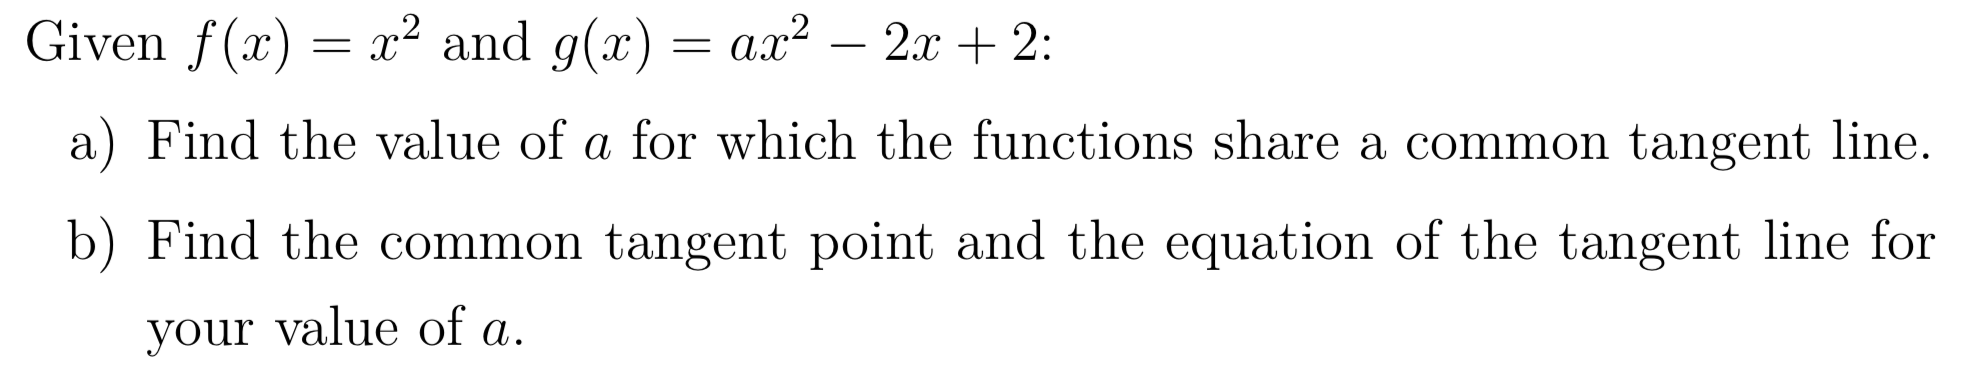 x2 and g(x) = ax-2x +2:
Given f(x)
a) Find the value of a for which the functions share a common tangent line.
b) Find the common tangent point and the equation of the tangent line for
your value of a
